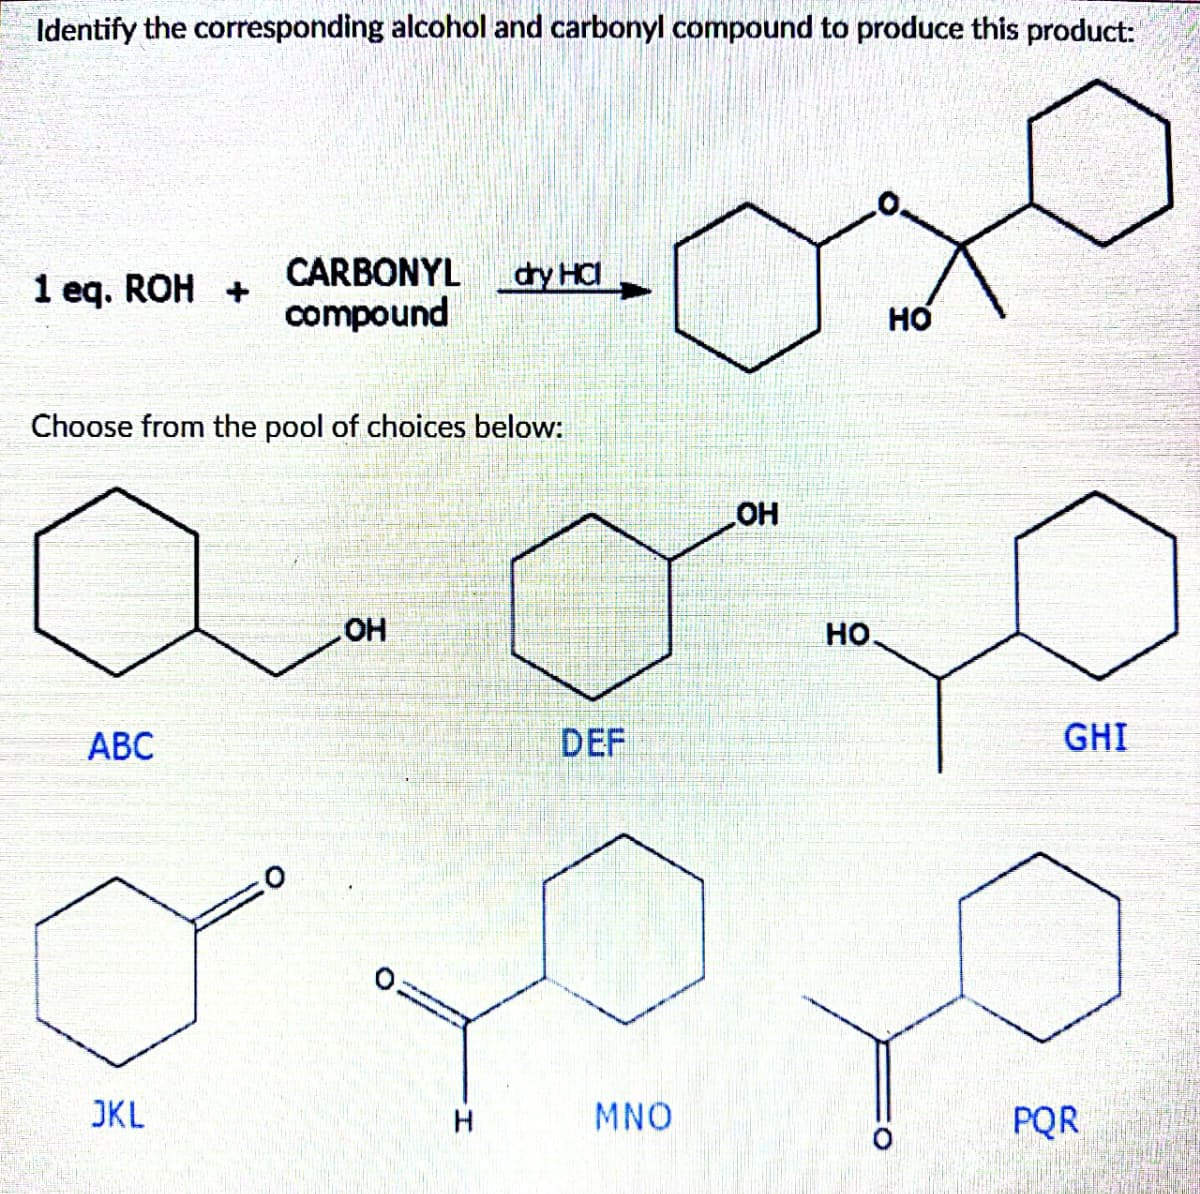 Identify the corresponding alcohol and carbonyl compound to produce this product:
1 eq. ROH +
Choose from the pool of choices below:
ABC
CARBONYL dry HCI
compound
JKL
OH
H
DEF
MNO
OH
HO.
HO
O
GHI
PQR